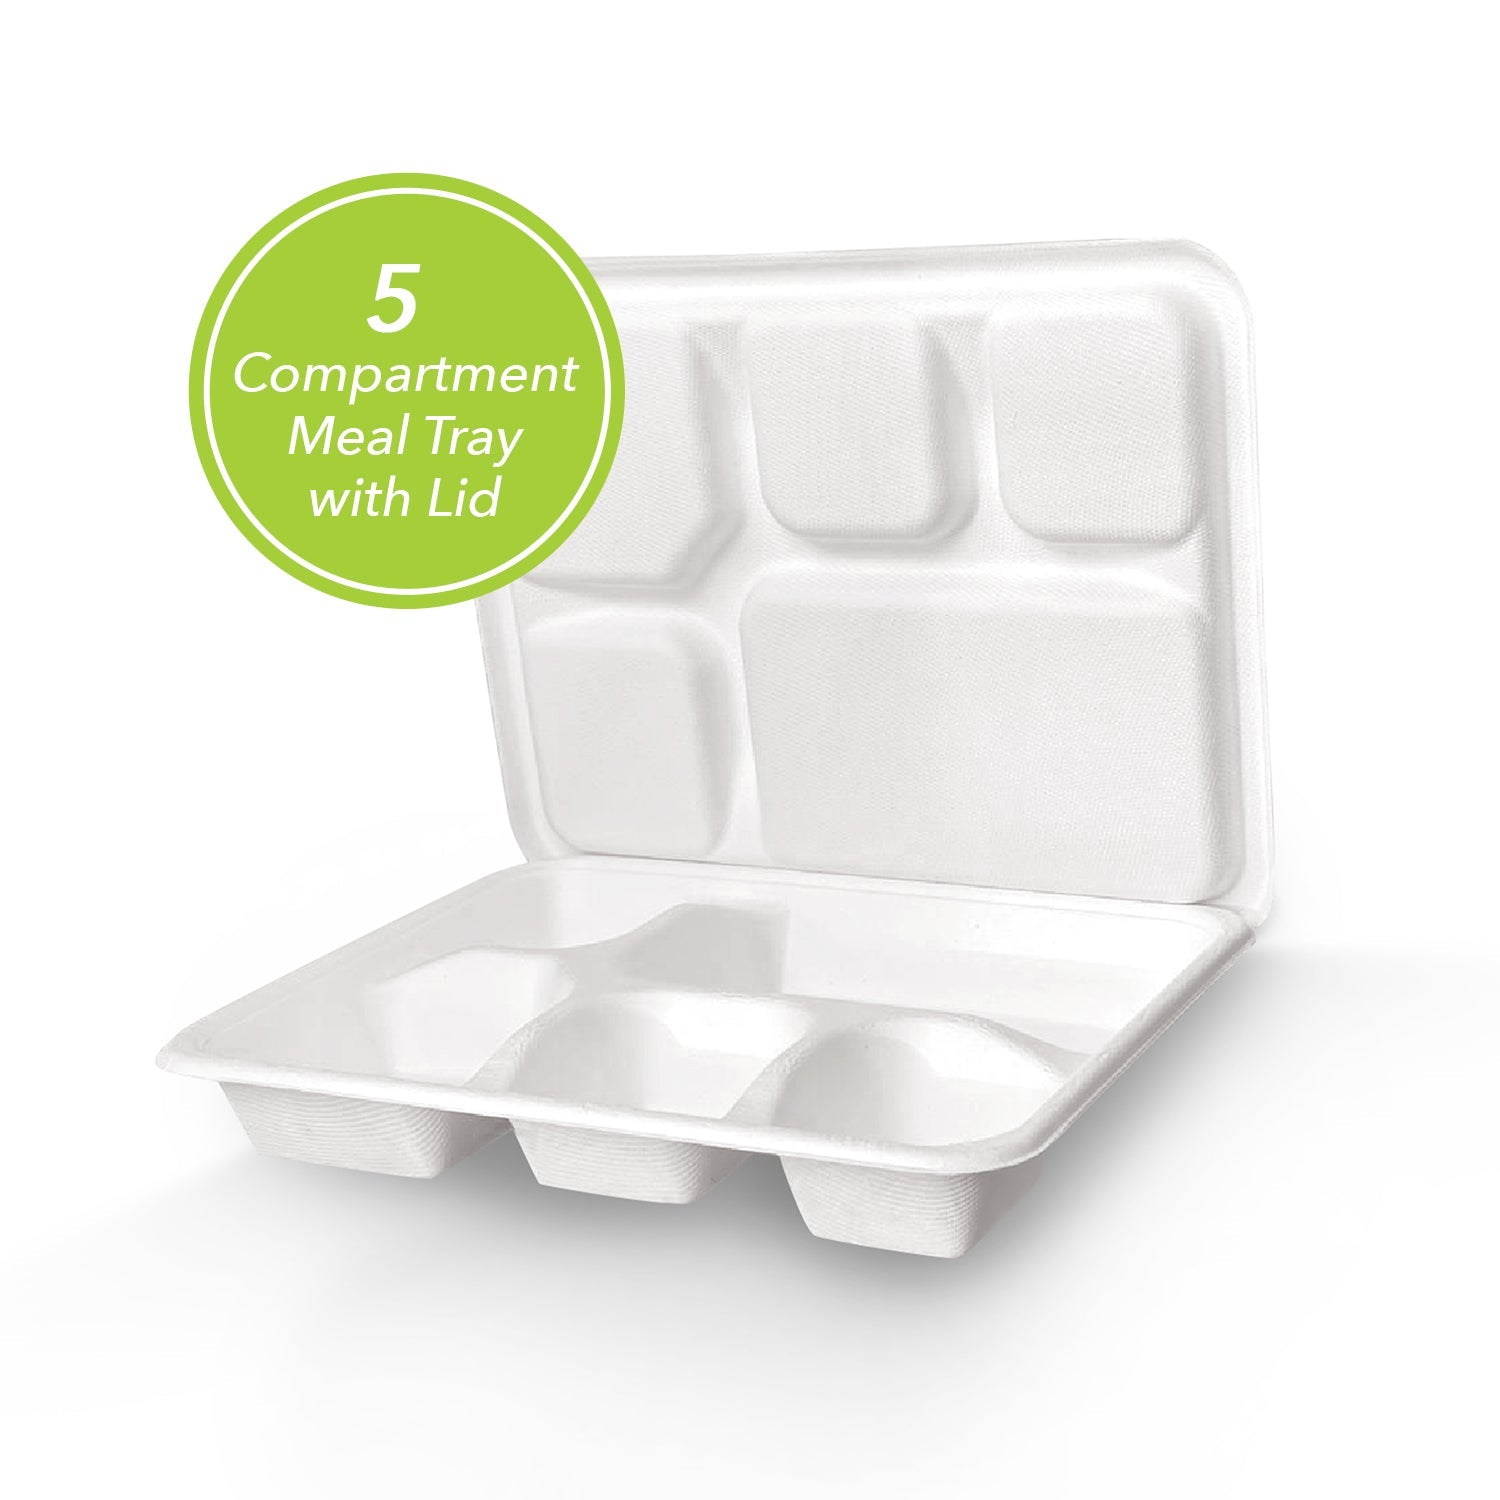 Three Leaf 5 Compartment Meal Tray with Lid Set, 25 SETS. Heavy-Duty- Super Strong- Natural- Eco-Friendly Disposable Bagasse Plates with Lead, 100%